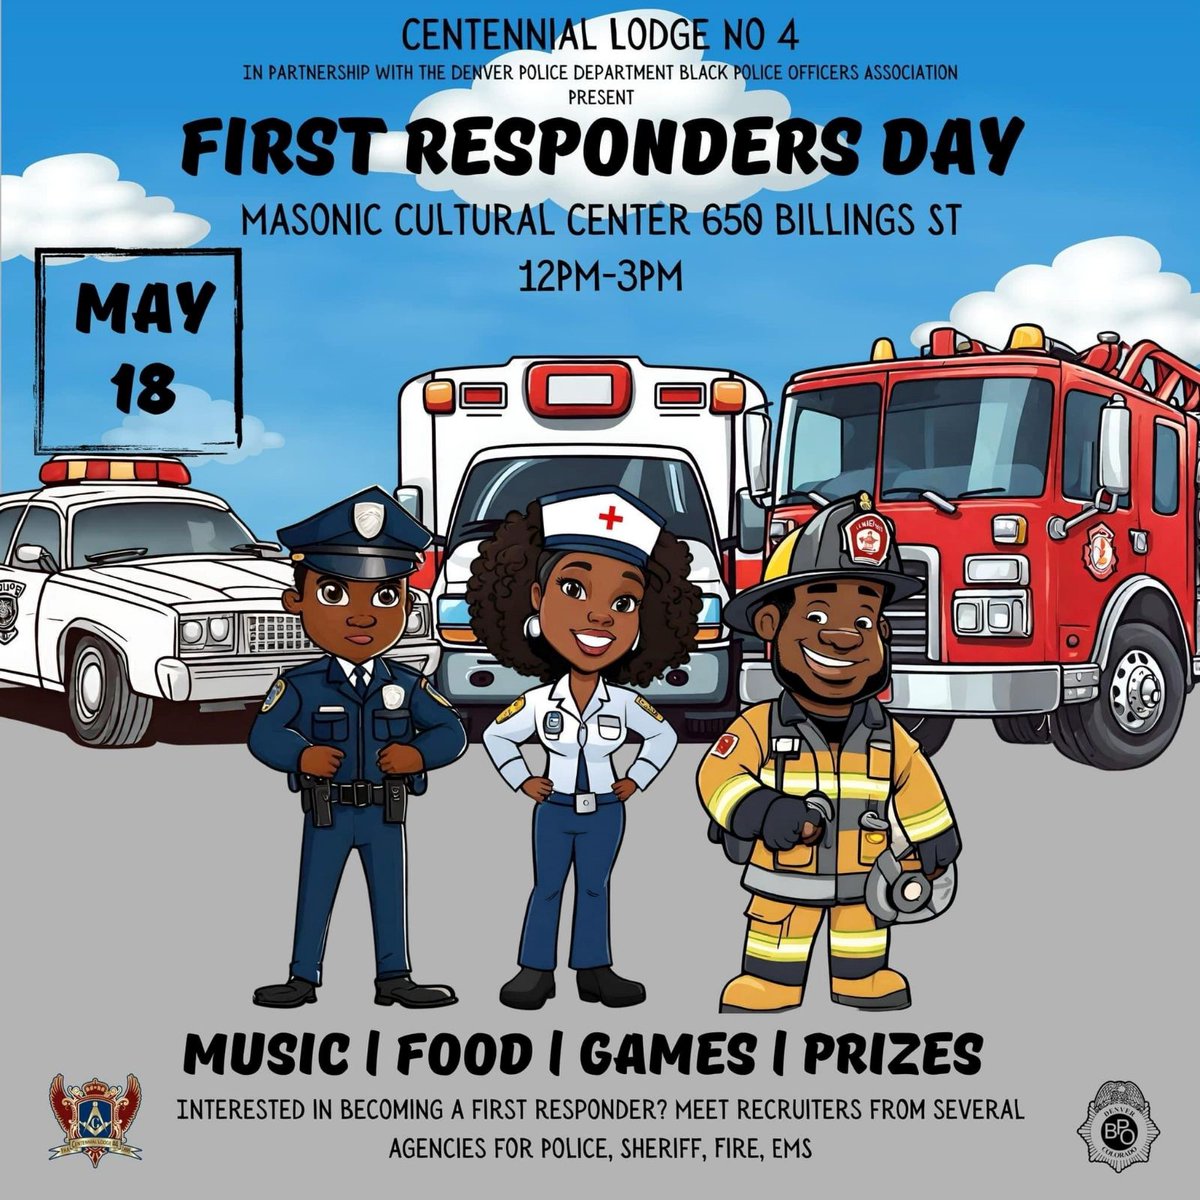 Join us this Saturday for a recruiting event you won't want to miss out on! 👋 The @DenverPolice Black Police Officers Association and the Centennial Lodge No. 4 are hosting a First Responders Day event. This is your chance to meet with different public safety agencies, hear